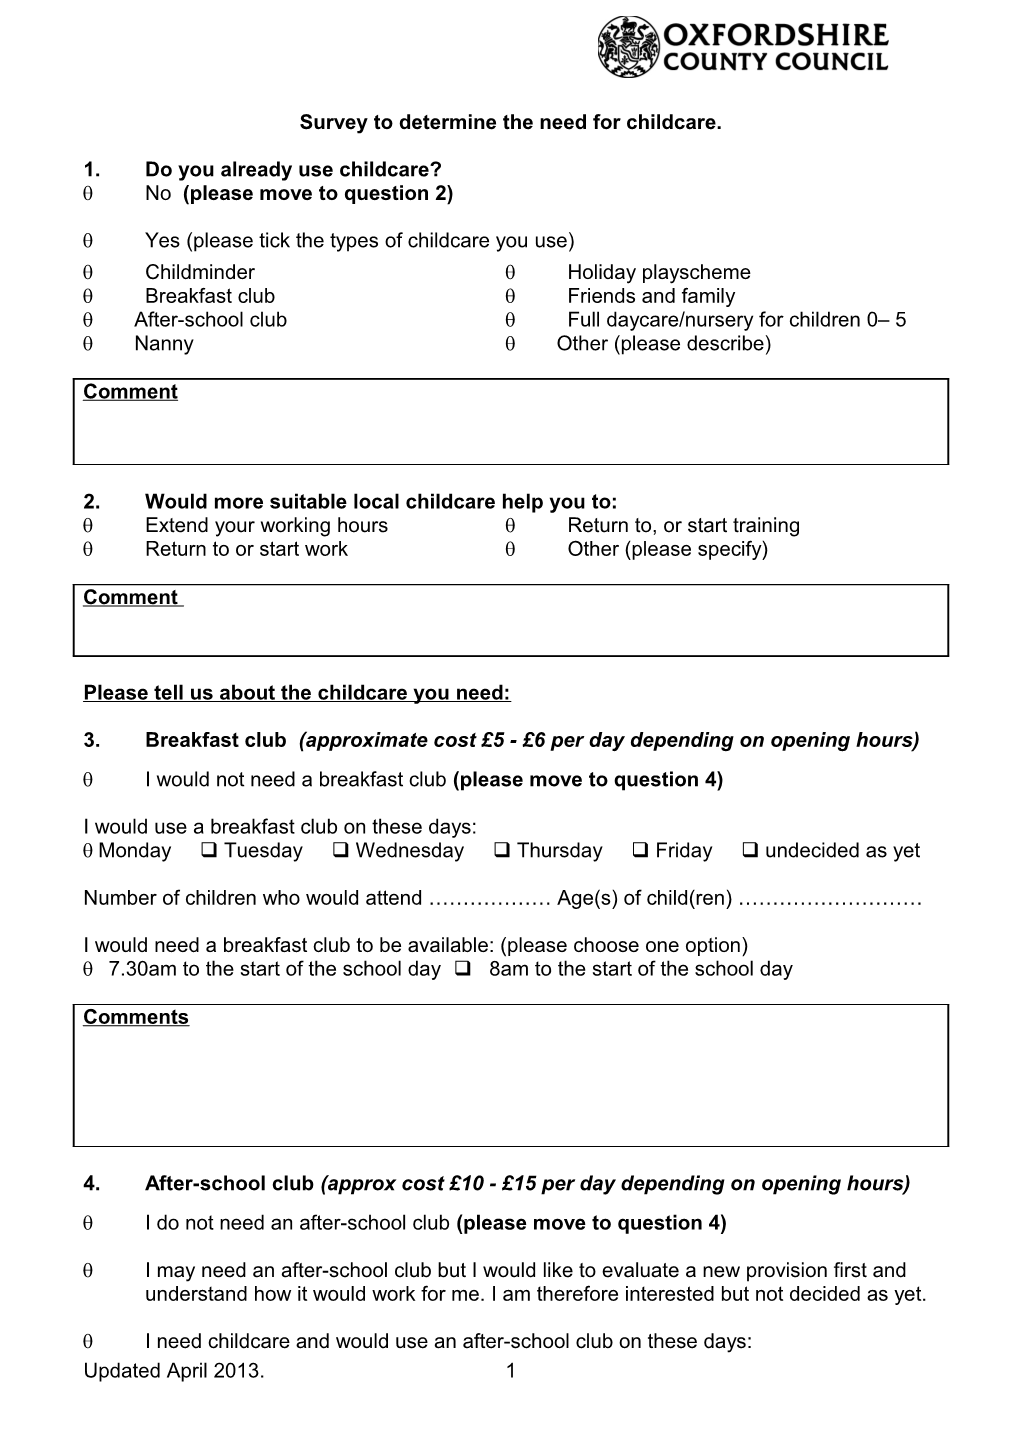 Model Questionnaire for an After-School Club